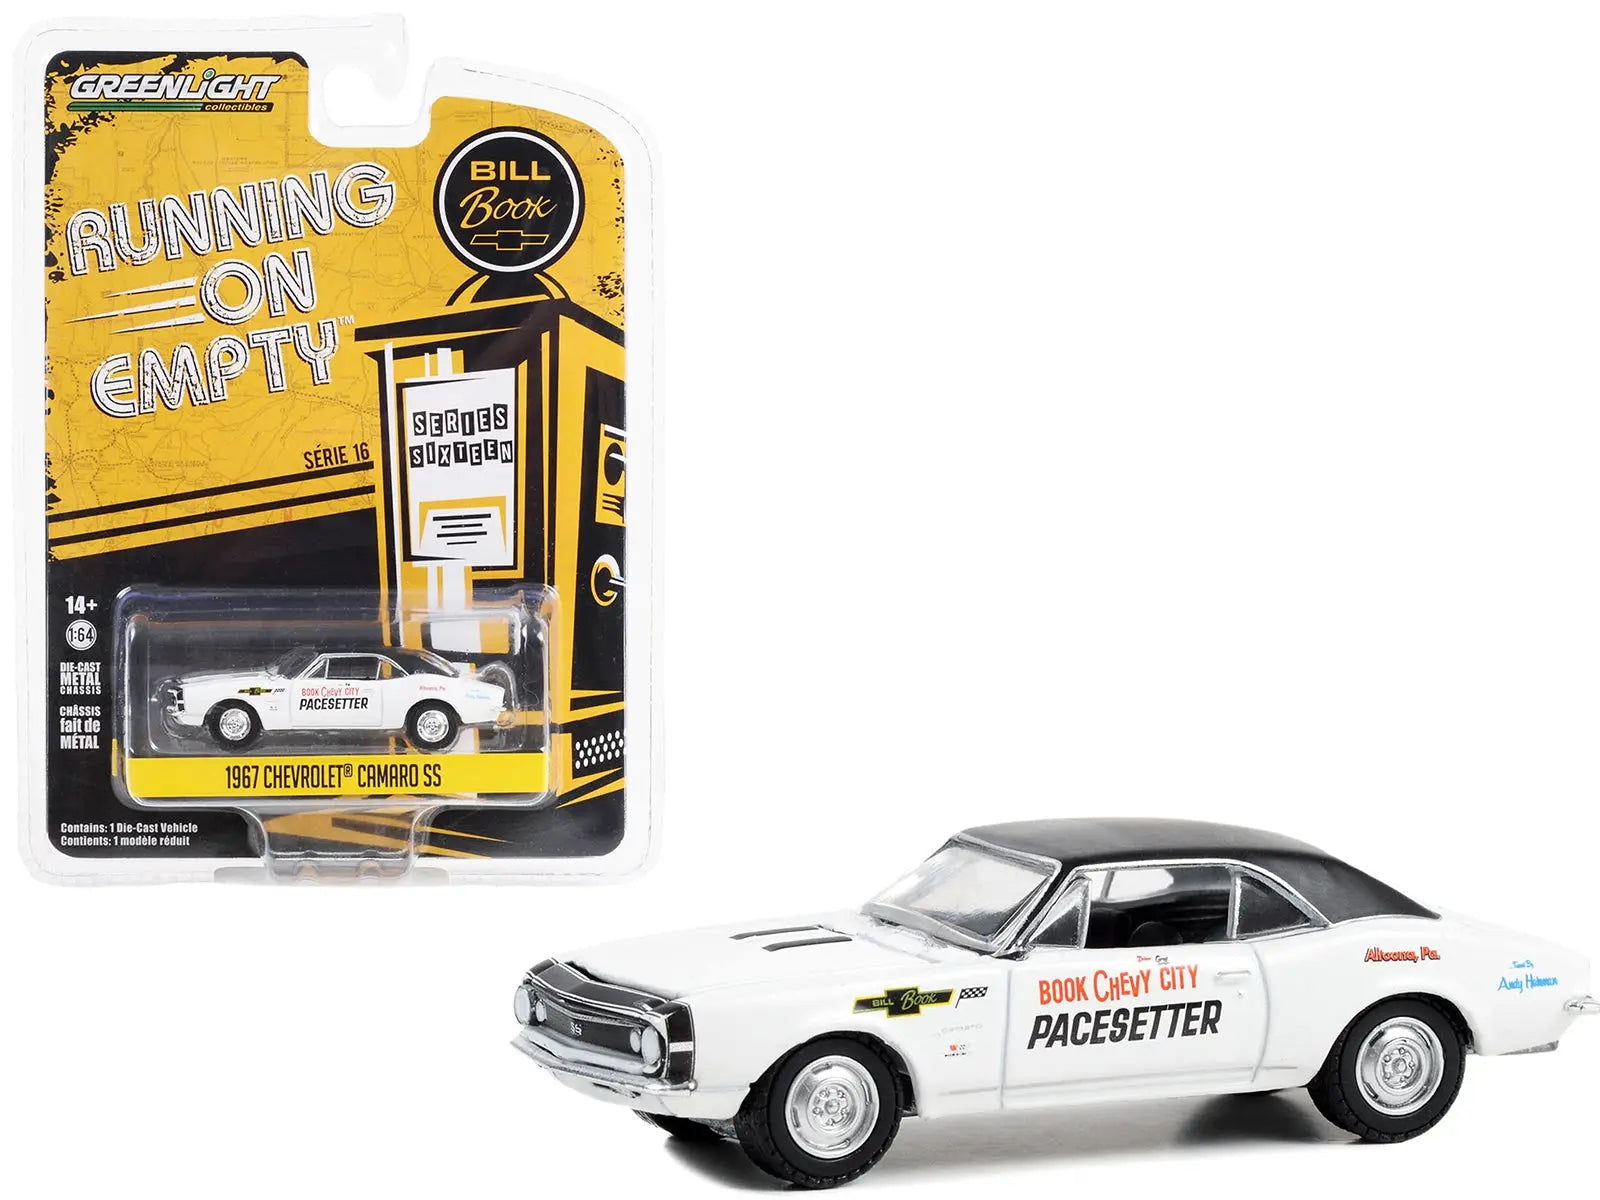 1967 Chevrolet Camaro SS White with Black Top "Book City Chevy Pacesetter - Altoona Pennsylvania" "Running on Empty" Series 16 1/64 Diecast Model Car by Greenlight Greenlight